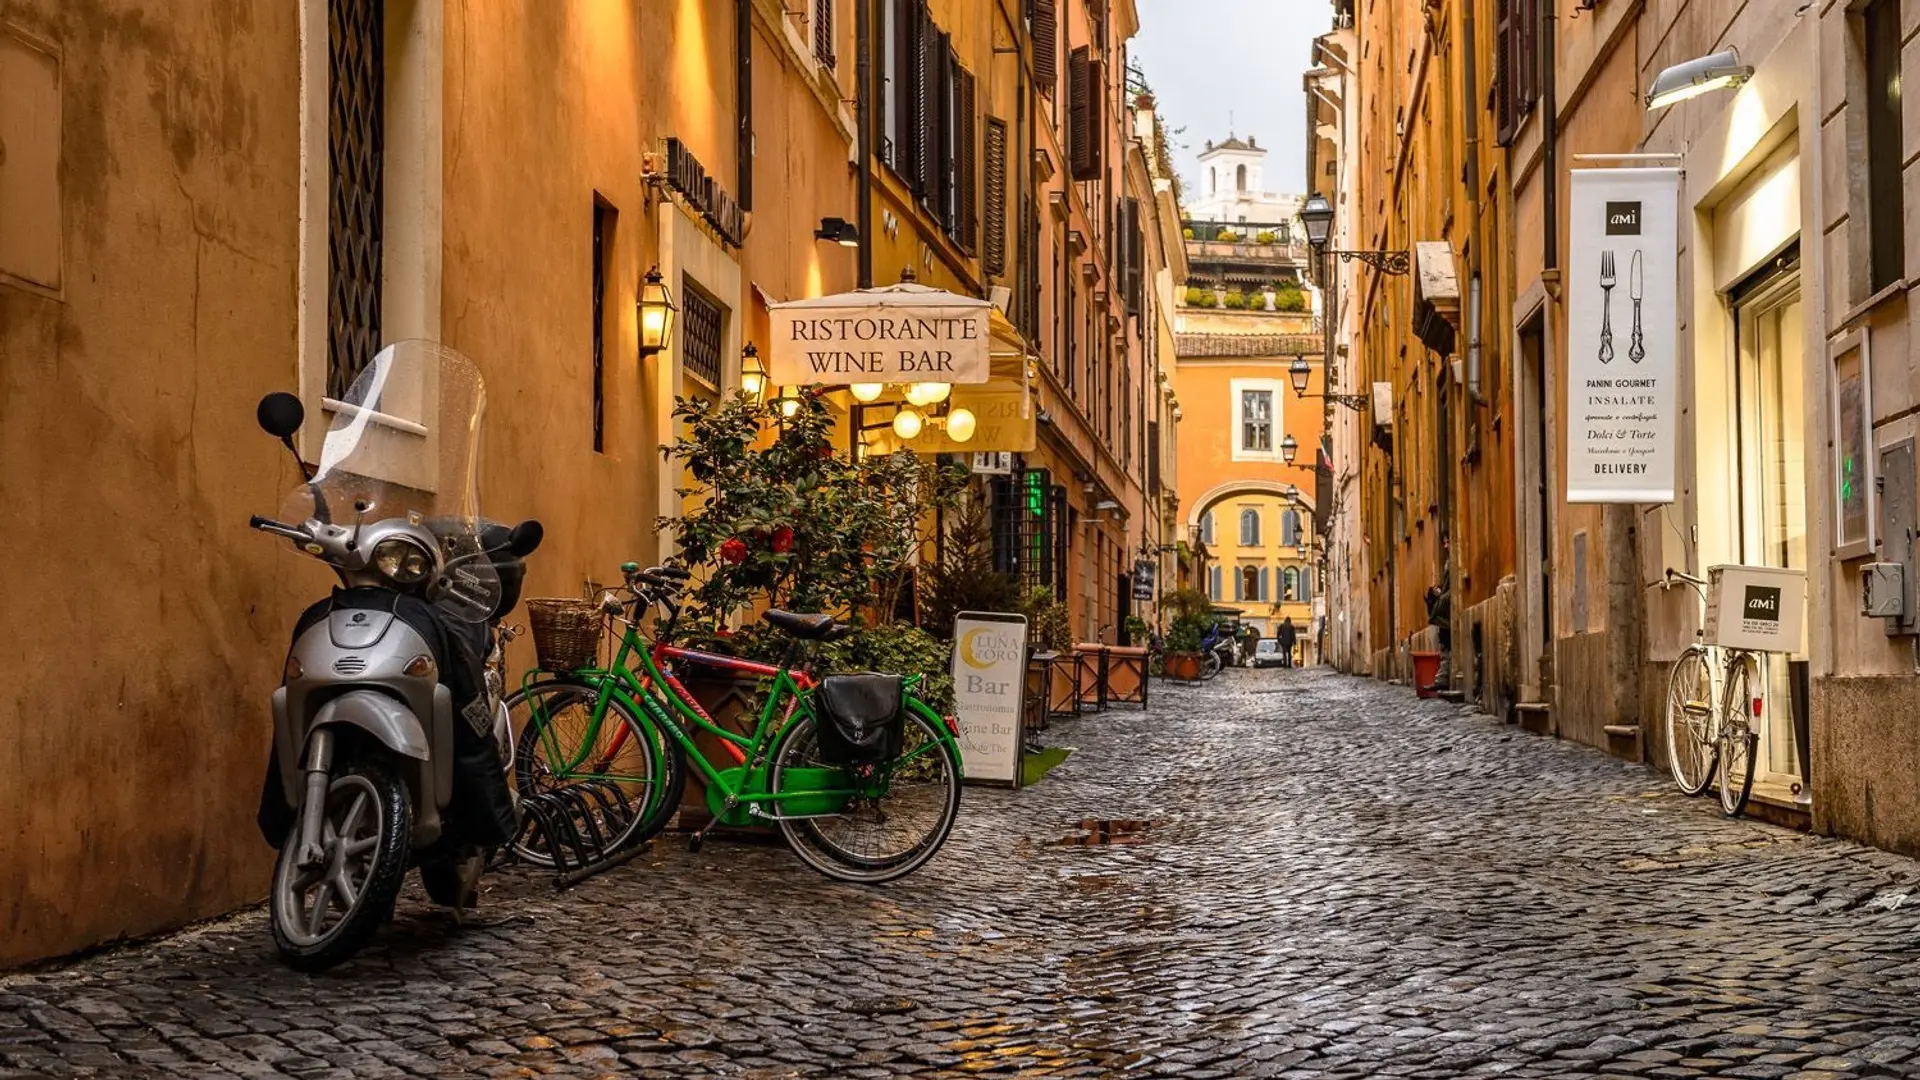 Small lane in Rome with bicycles and a motorbike, stone street, and orange sunset looking arcitecthure.